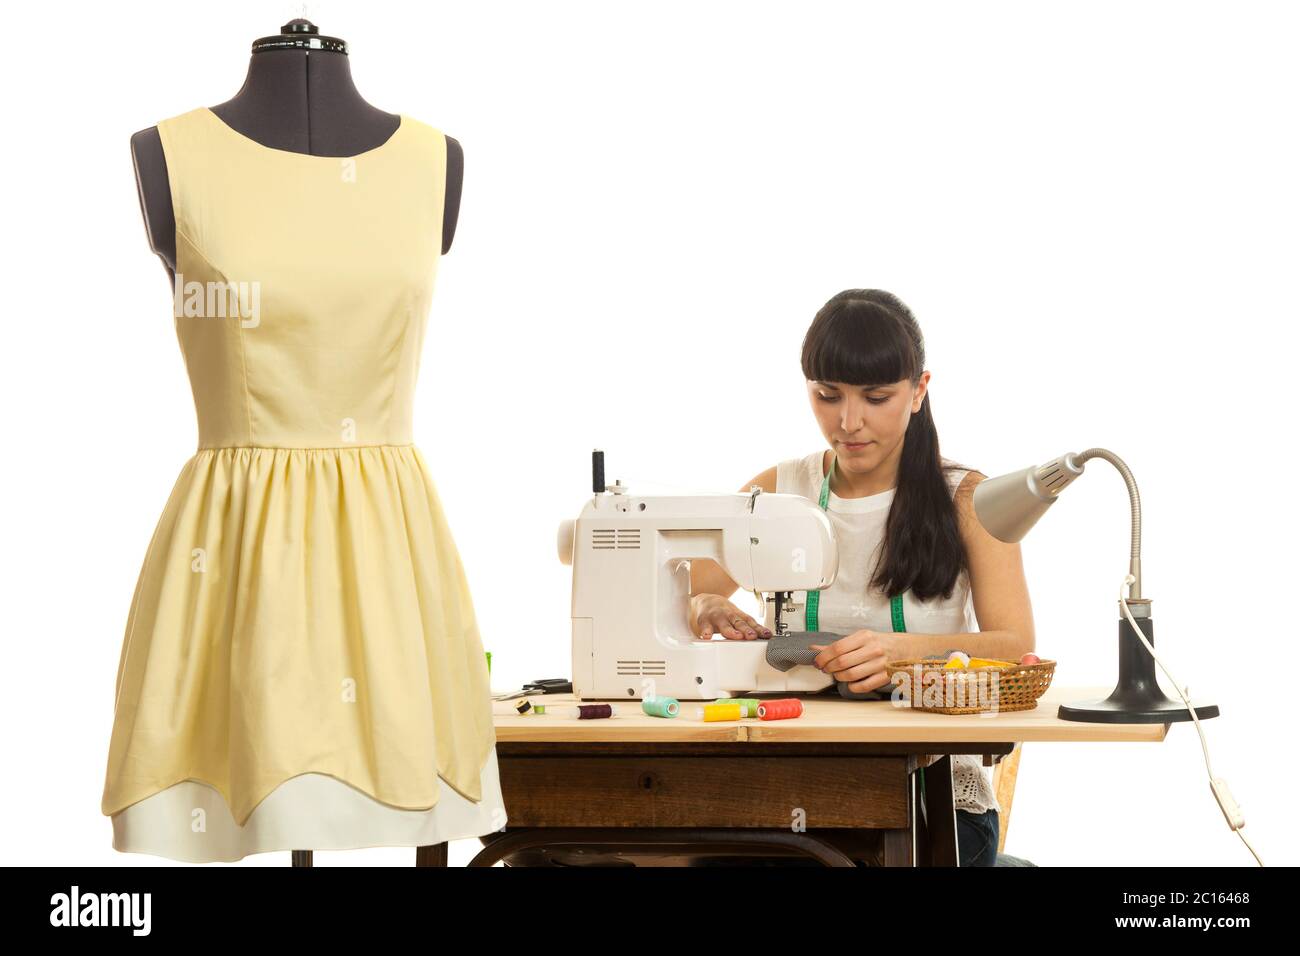 the seamstress sews a product on a table Stock Photo